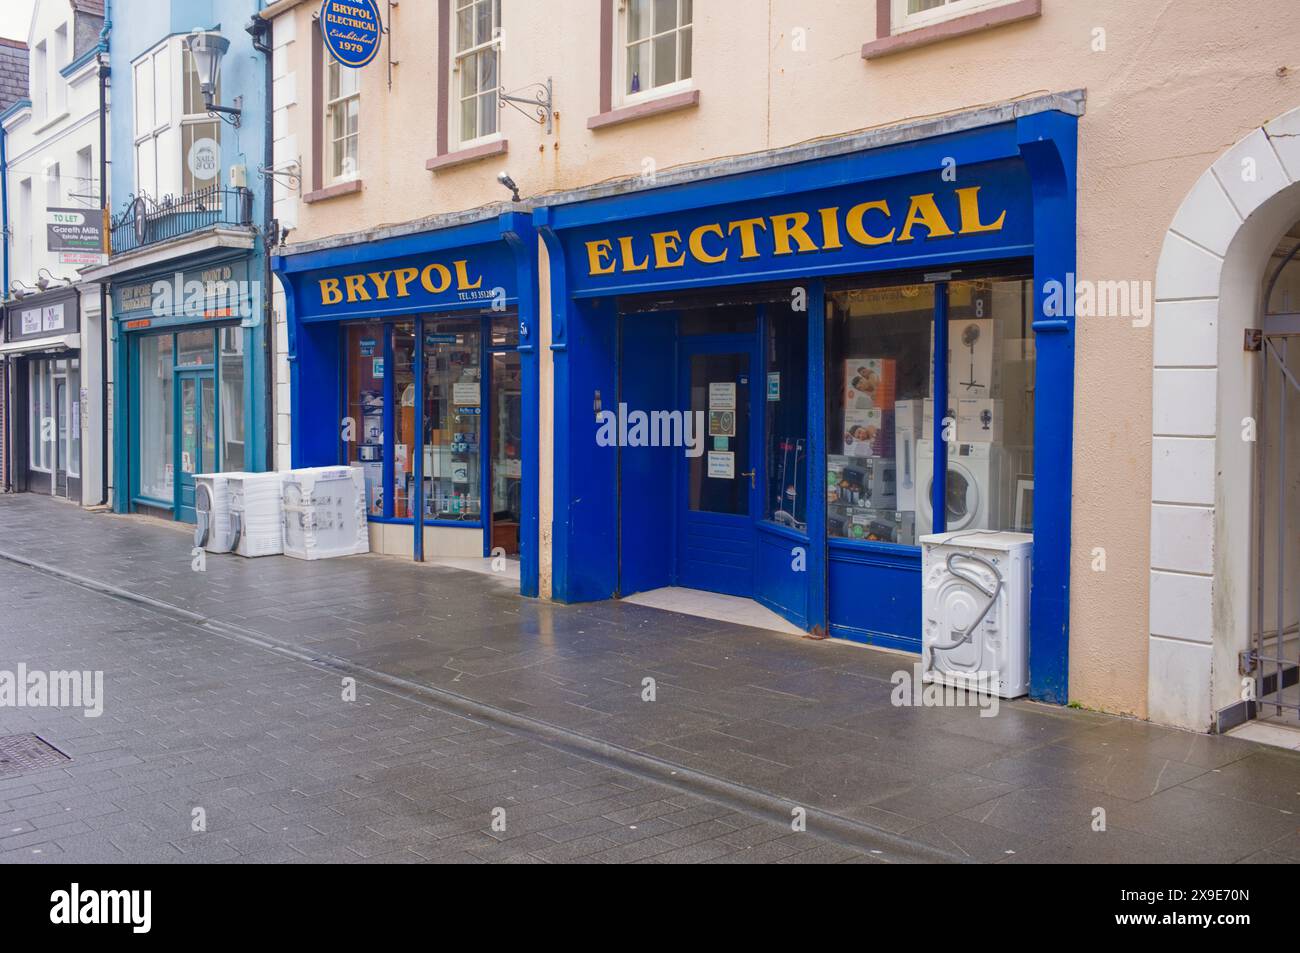 Brypol electrical white goods retailer in the centre of Carrickfergus, Northern Ireland Stock Photo